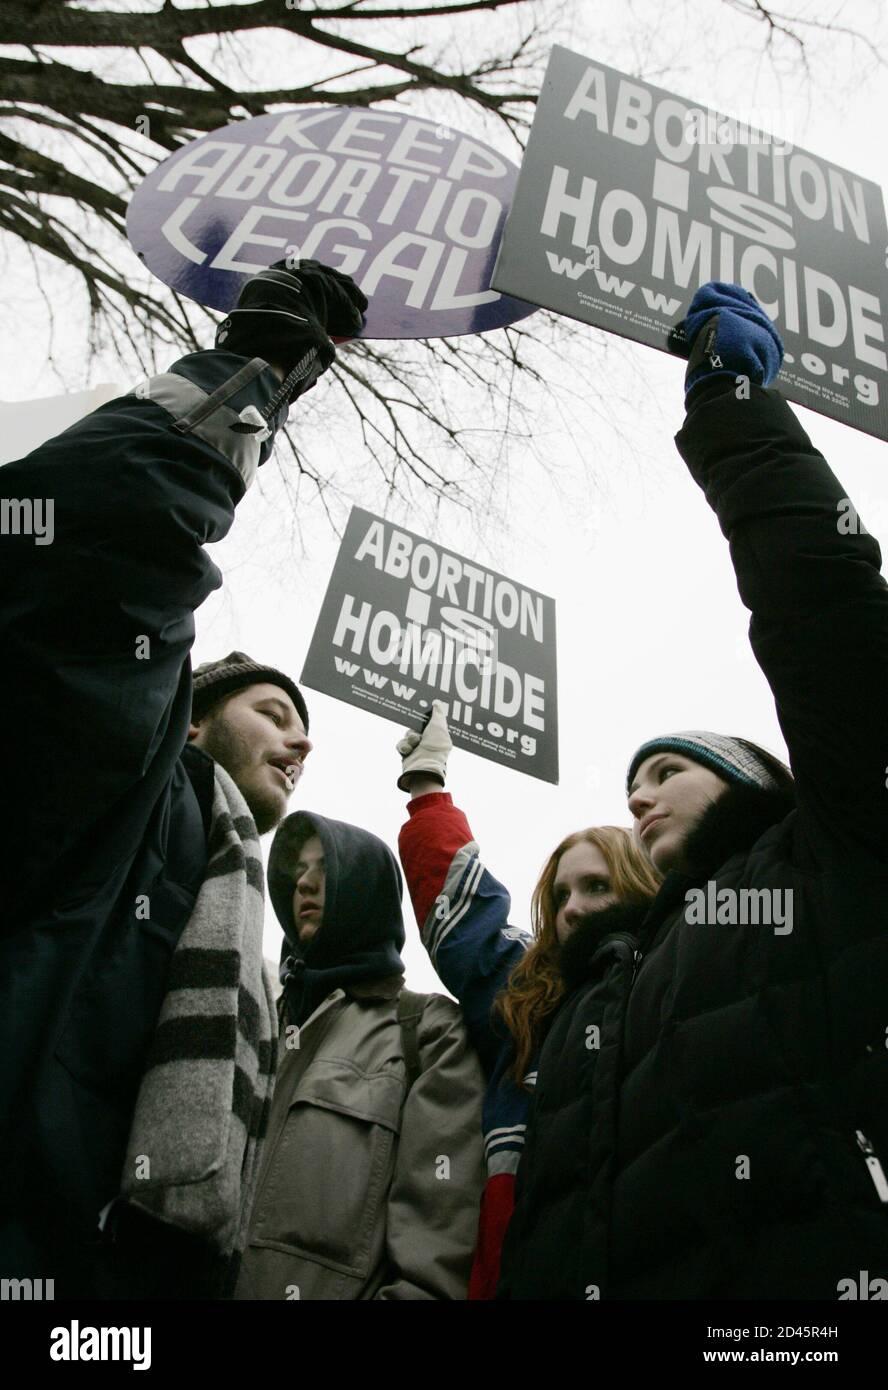 Pro-choice activist Luqman Clark of Arlington, Virginia (L) argues with an anti-Abortion protestor outside the U.S. Supreme Court, in Washington, January 24, 2005. Thousands of pro-life activists marched to the Supreme Court where they were met by a handful of pro-choice campaigners on the 32nd anniversary of the Supreme Court's decision in the Roe v. Wade abortion rights decision. REUTERS/Jason Reed  JIR/GN Stock Photo